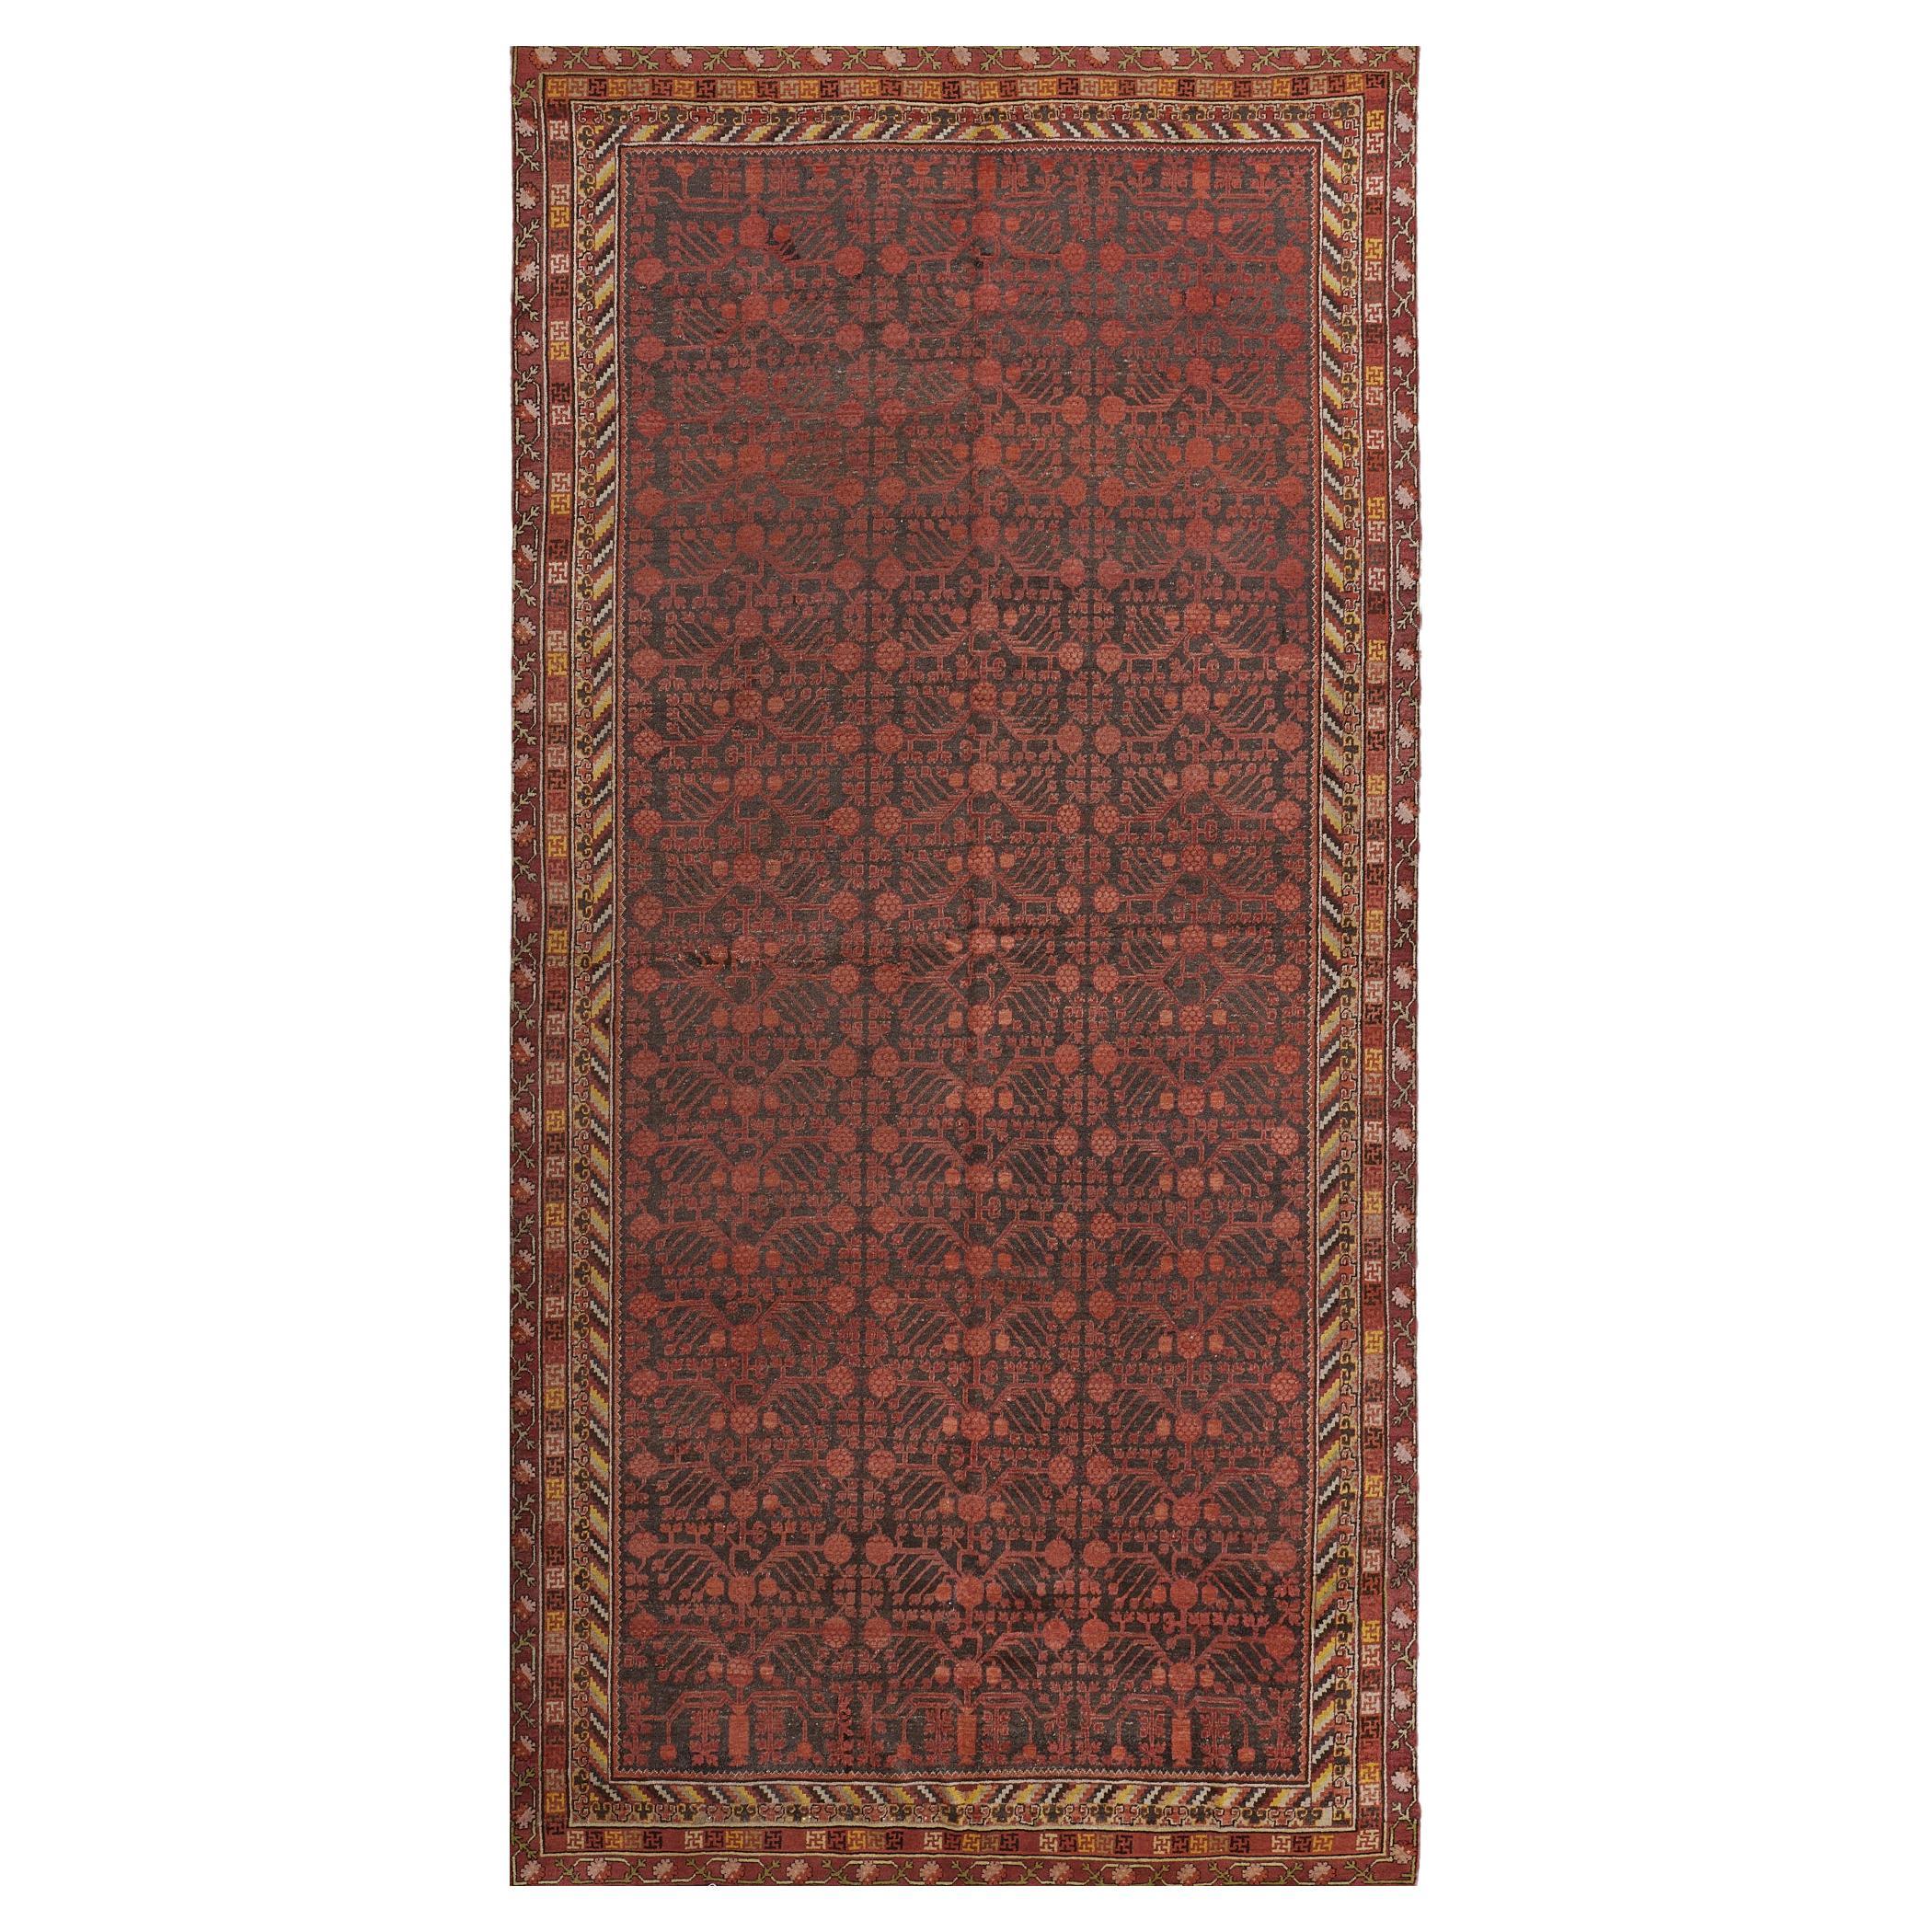 Antique Hand-Knotted Red Pomegranate Khotan Rug